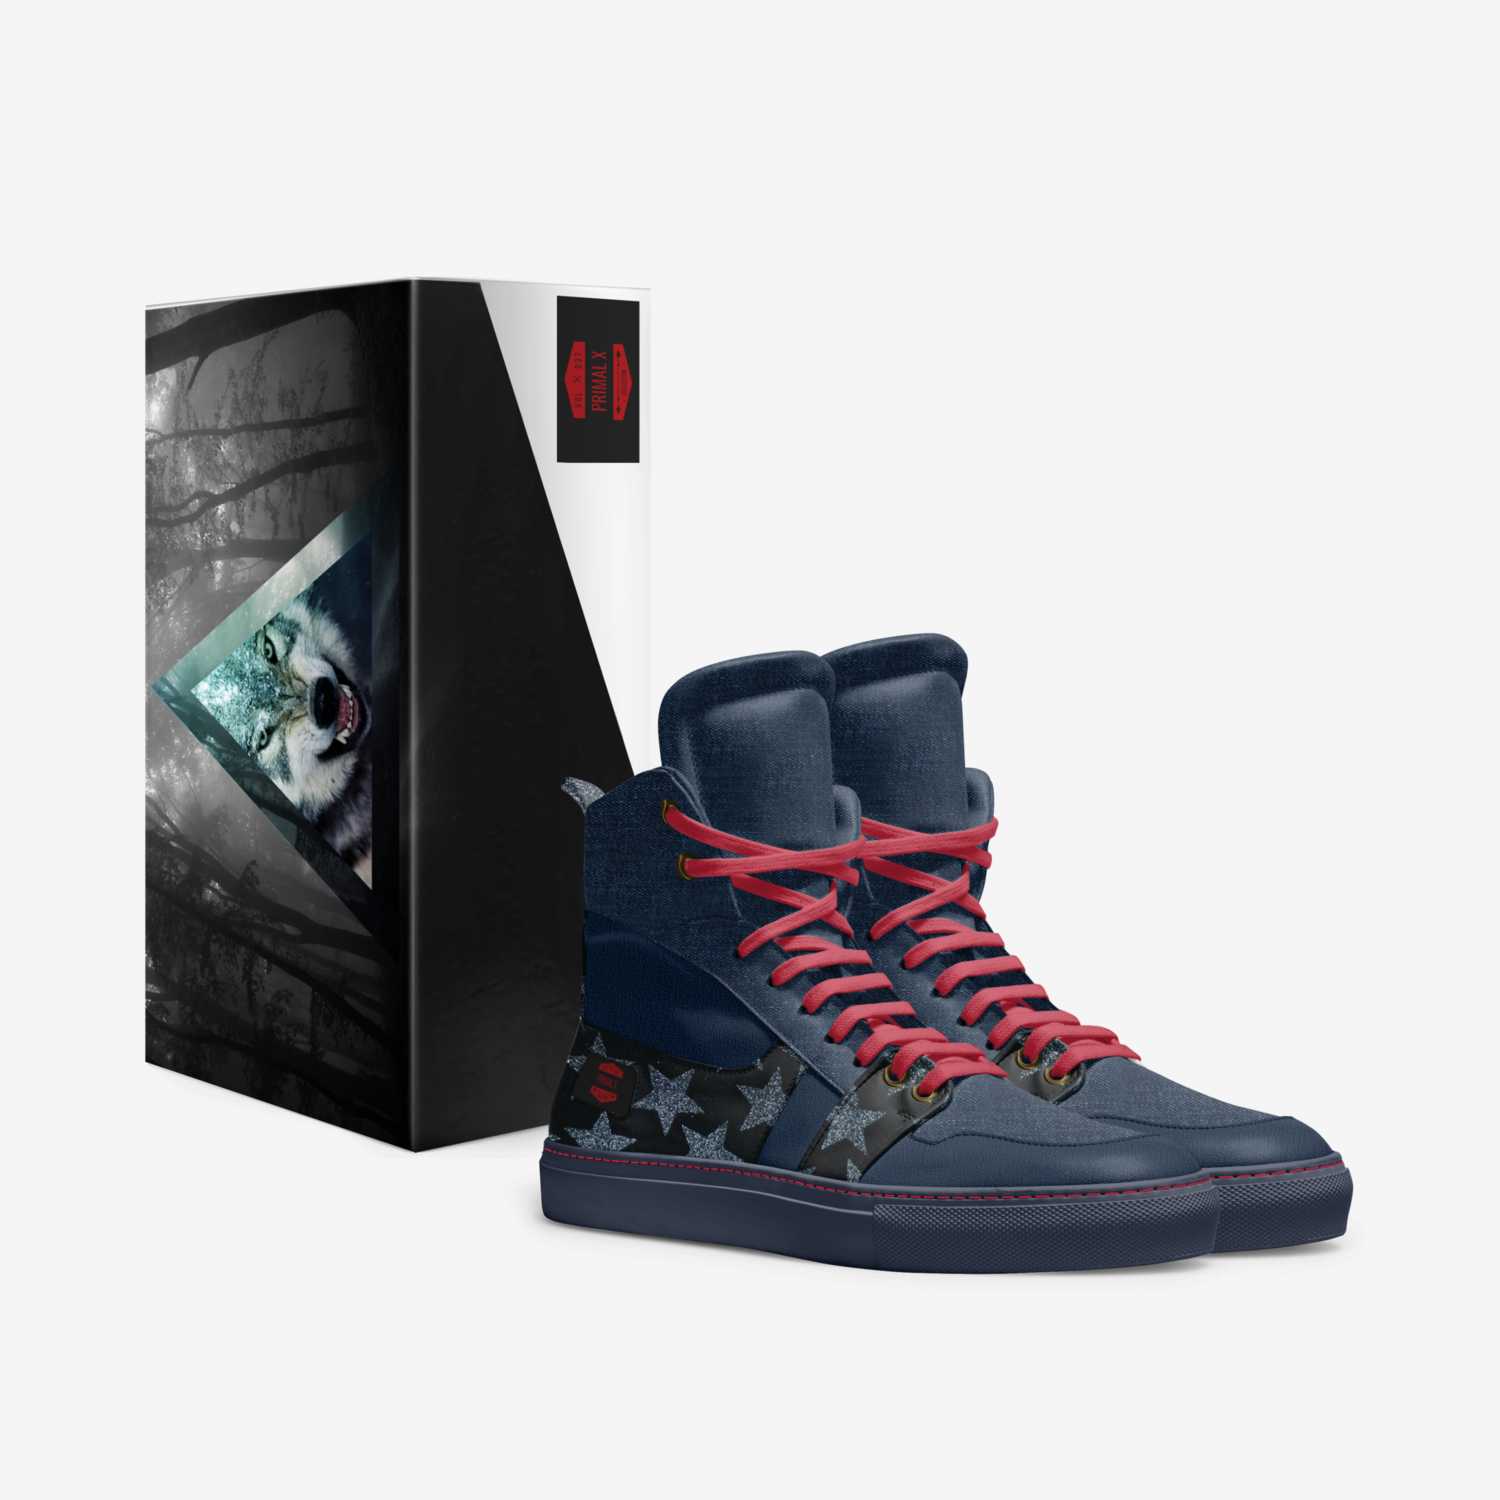 Primal X custom made in Italy shoes by Red5 Miller | Box view